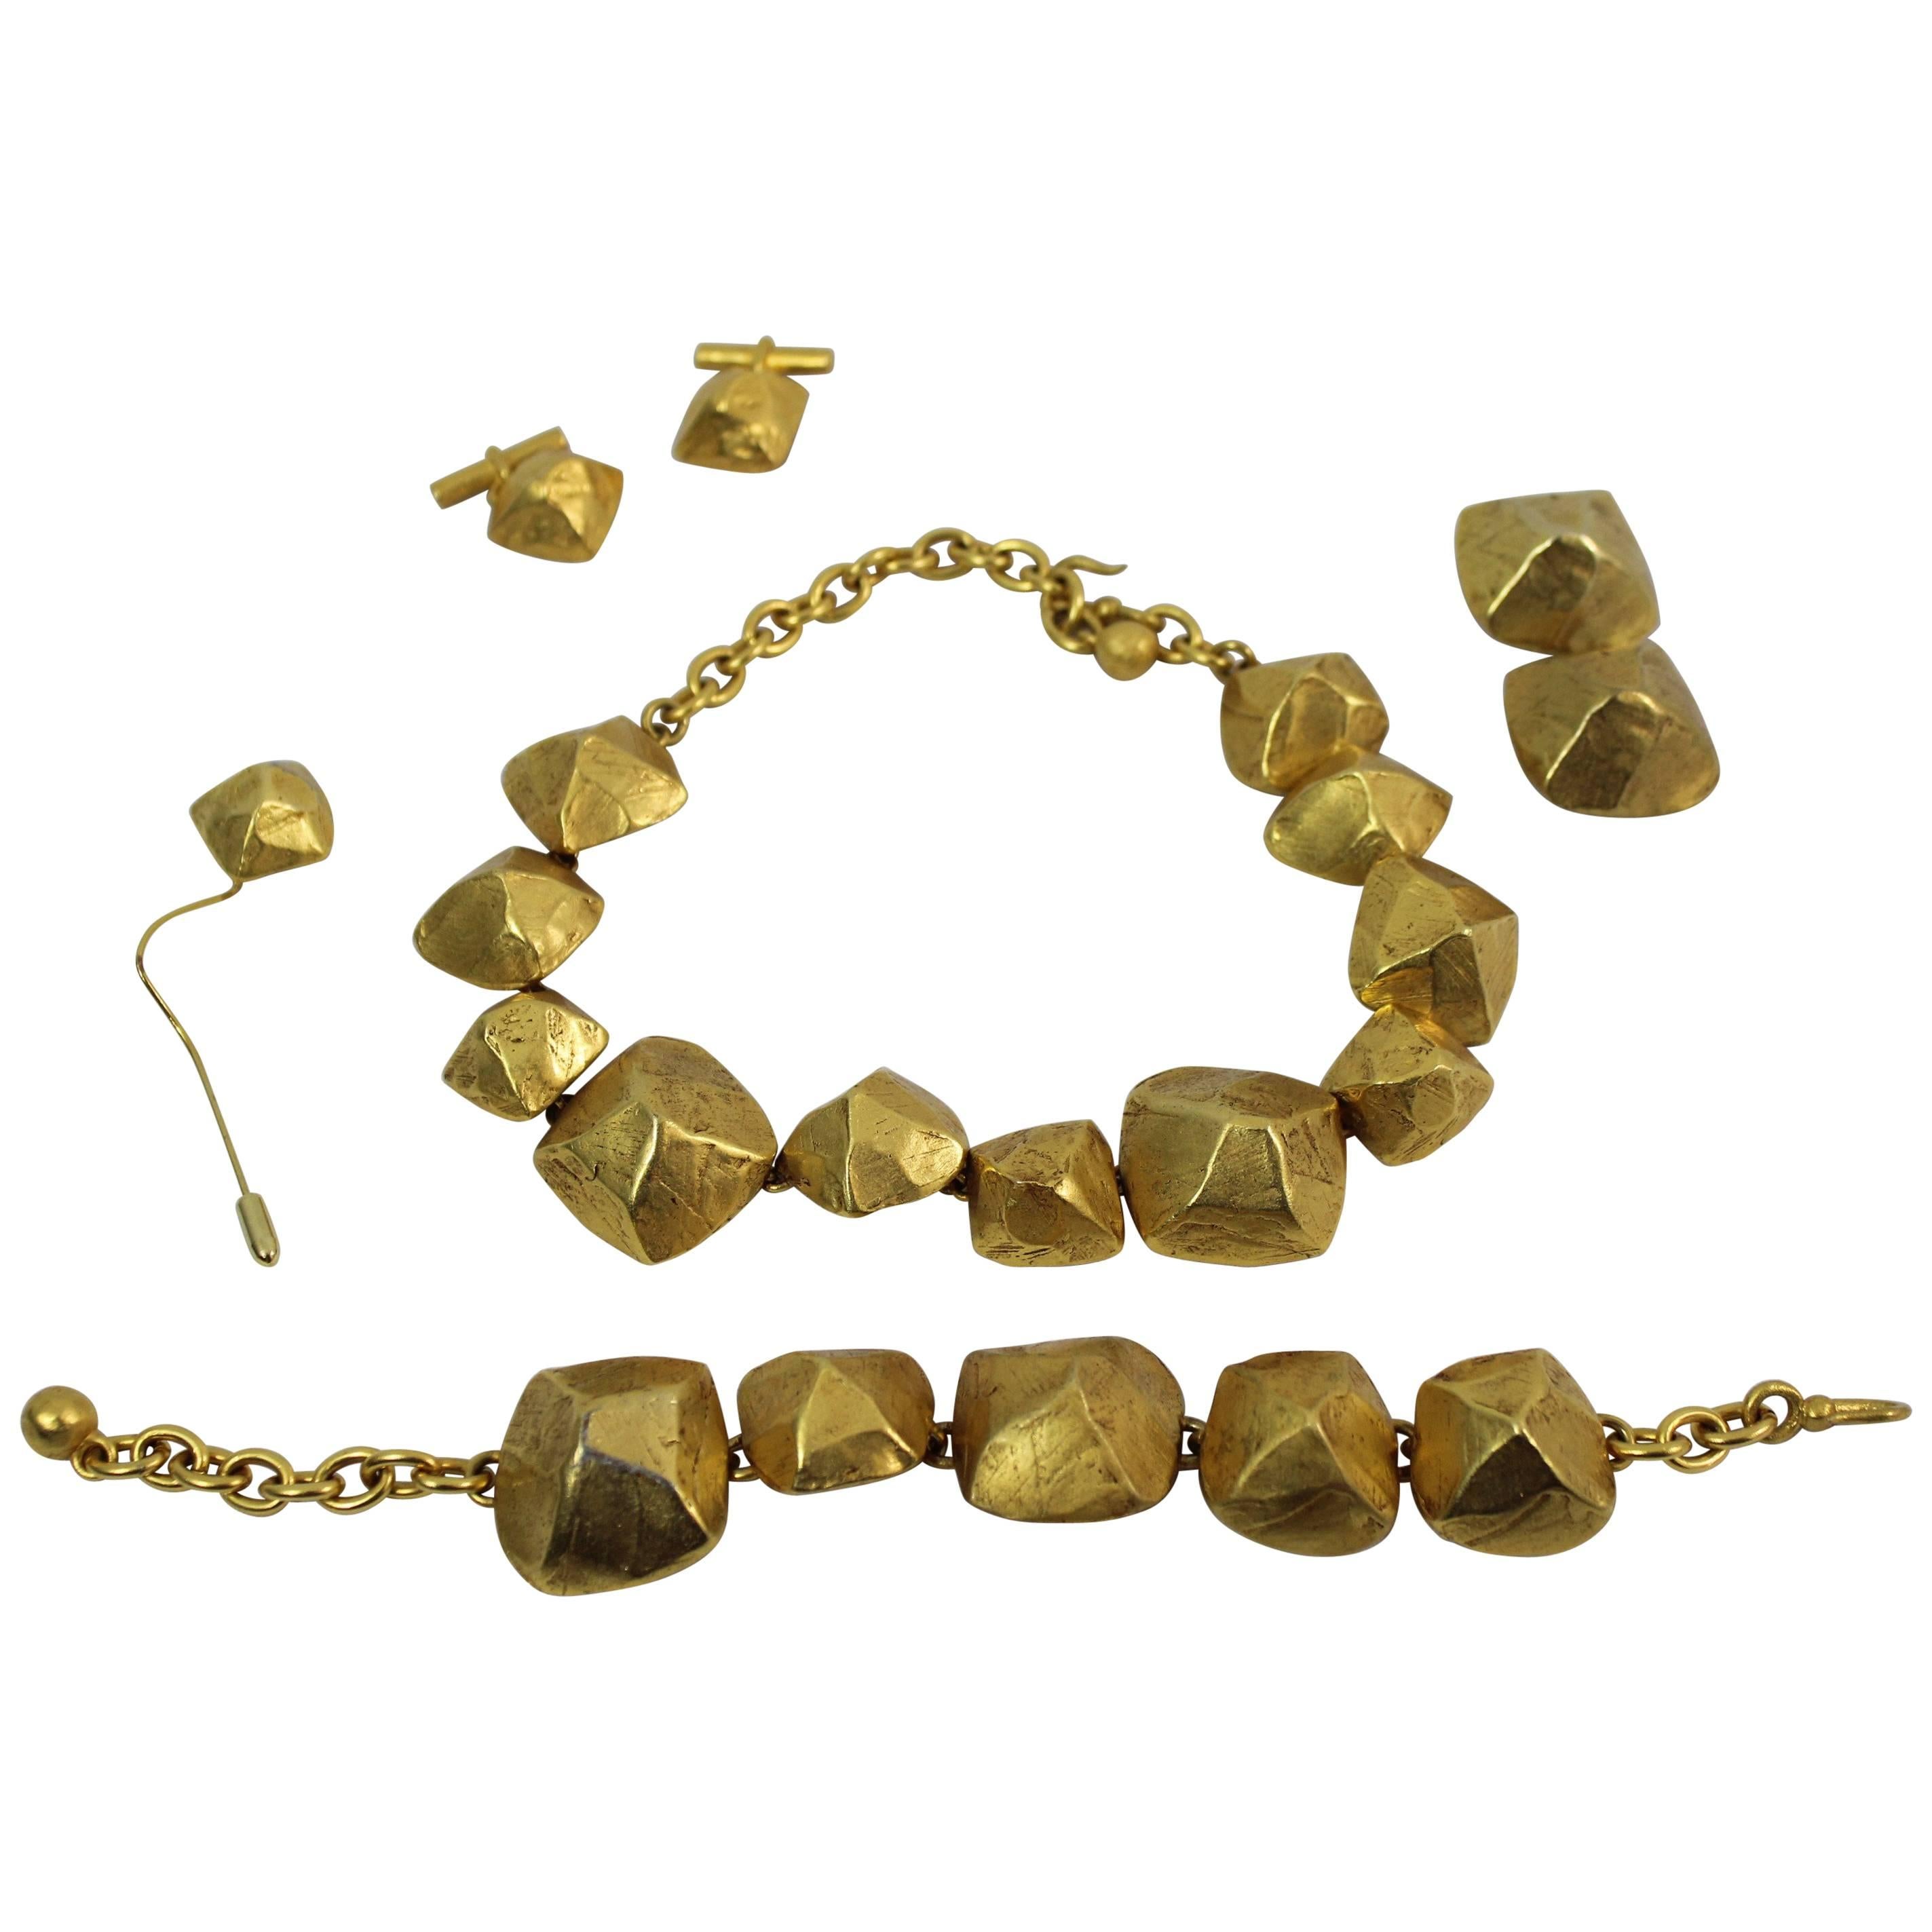 Hermes Vintage Gold-Plated Jewelry Set